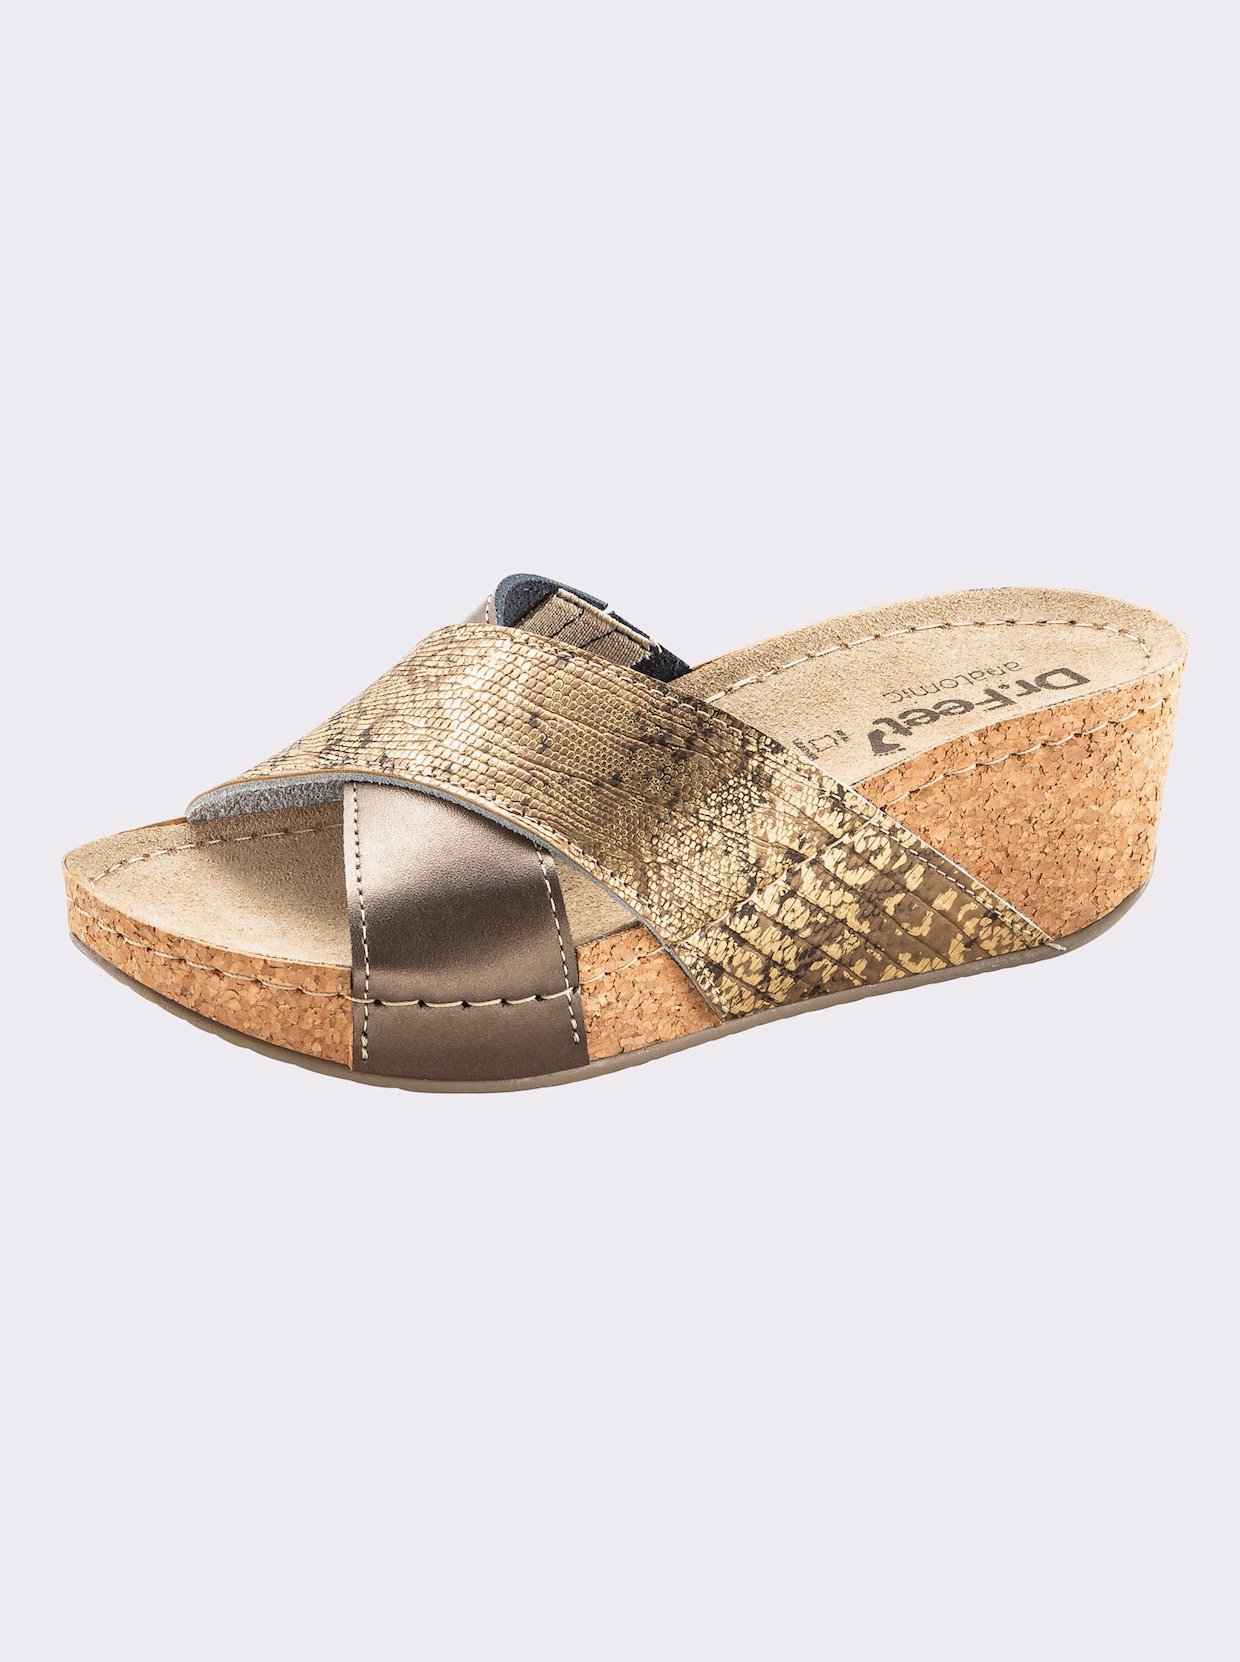 Dr. Feet Mules - taupe